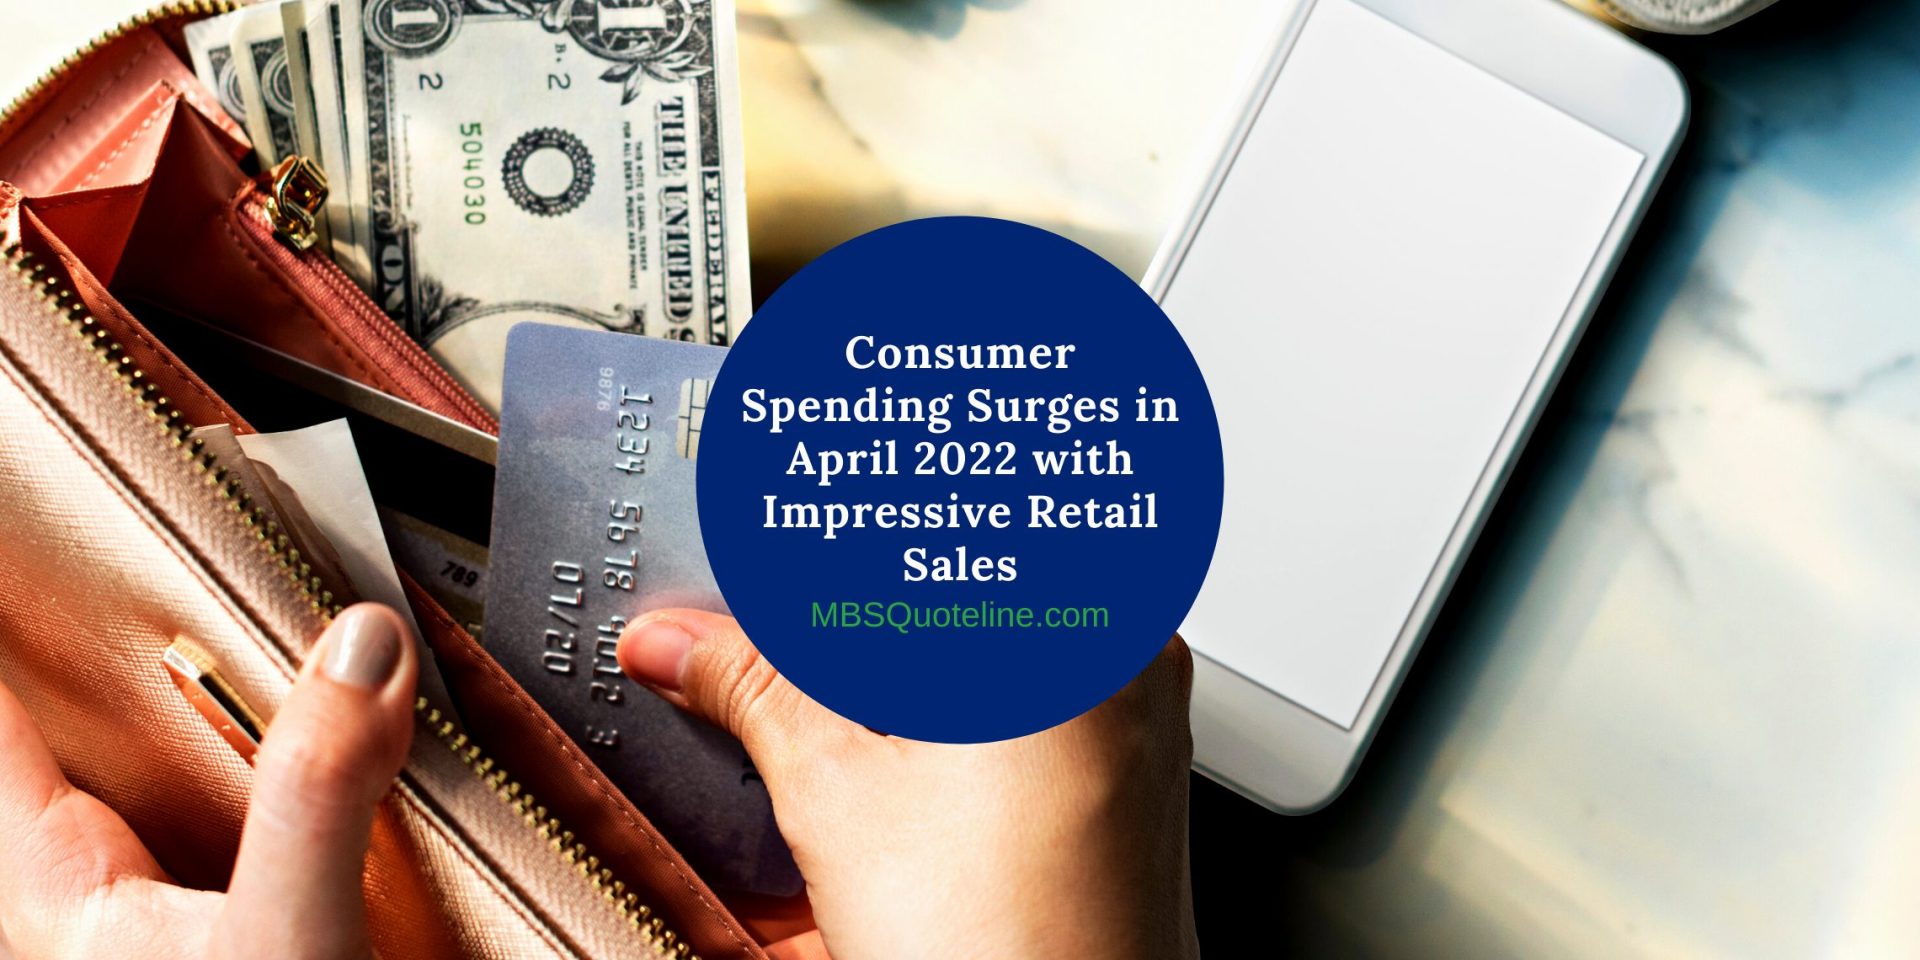 Consumer Spending Surges in April 2022 with Impressive Retail Sales mortgagetime mbsquoteline featured